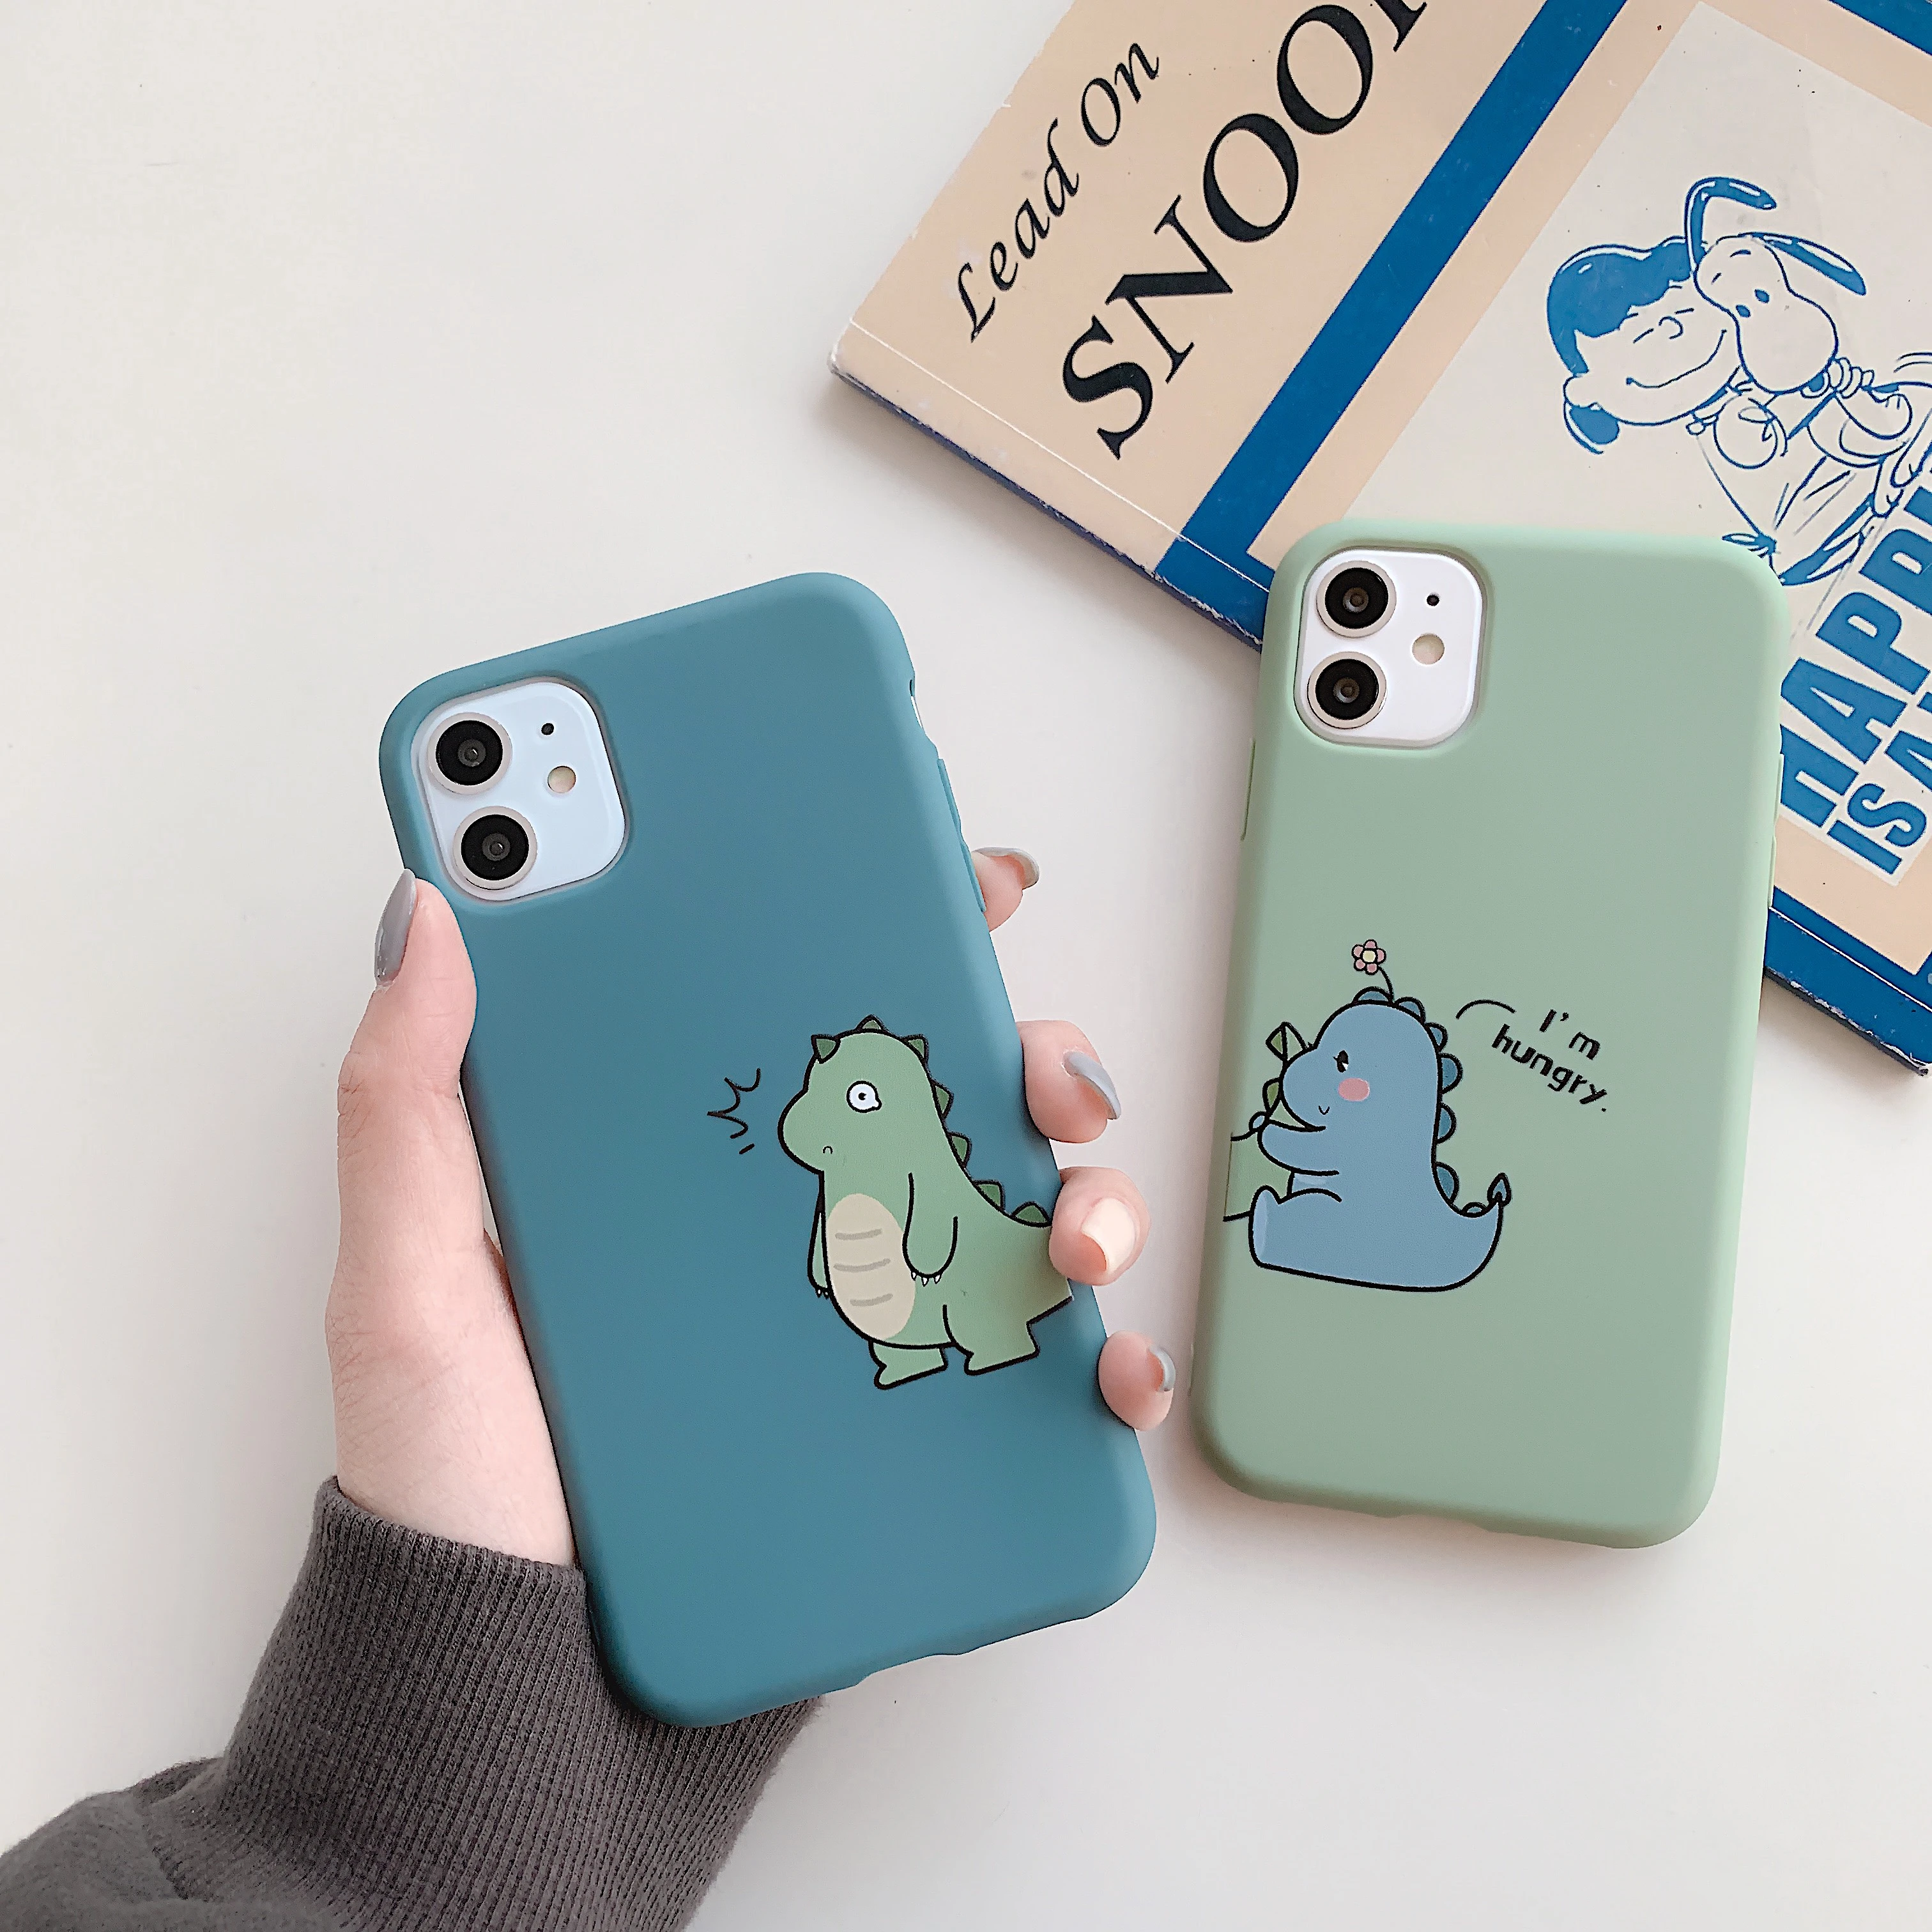 Cartoon Soft Tpu Back Phone Case for iPhone 7 8 Plus Anti Knock Protective Cover for iPhone X XS XR Max 11 Pro Max Couque apple iphone 11 Pro Max case